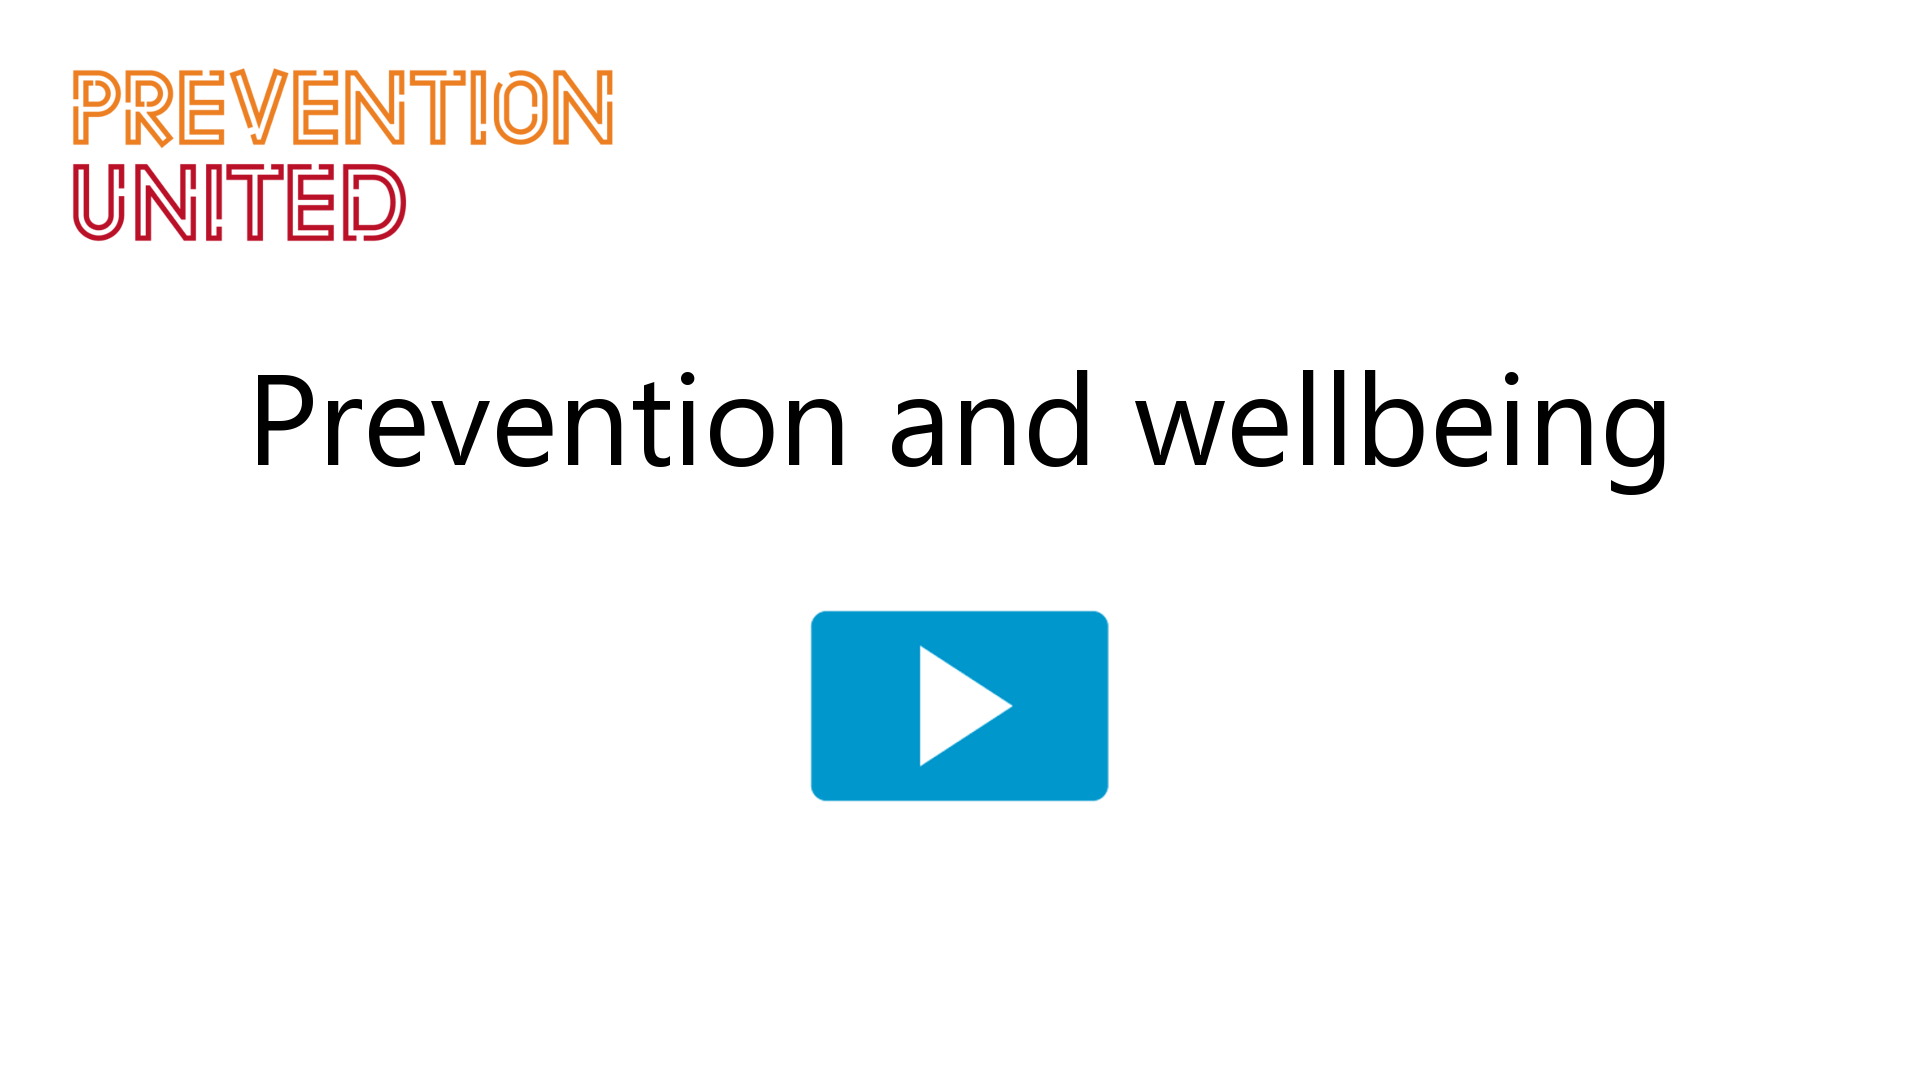 Prevention wellbeing